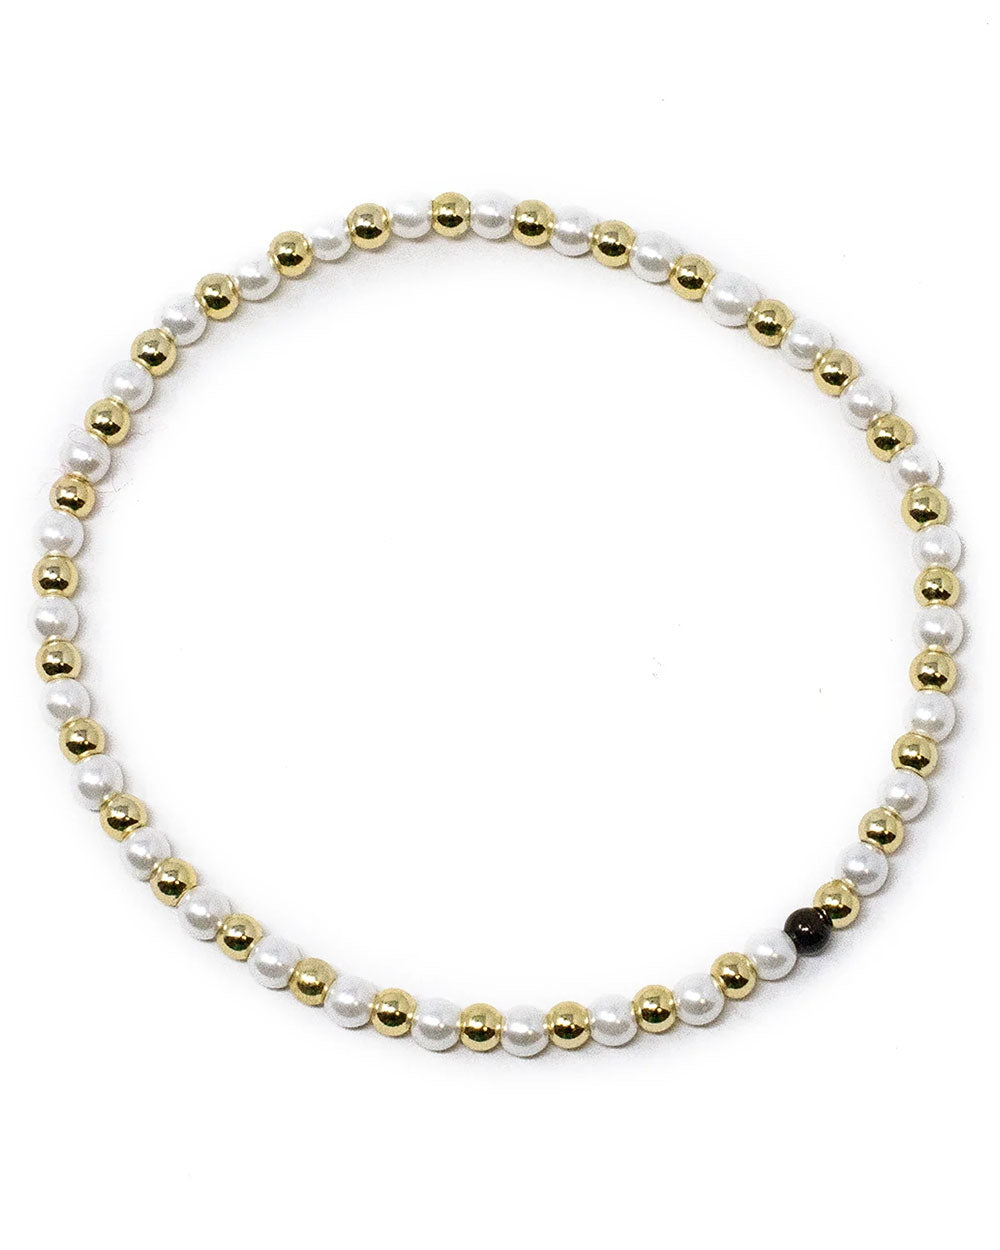 Chasing Pearl and Gold Dottie Stretch Bracelet